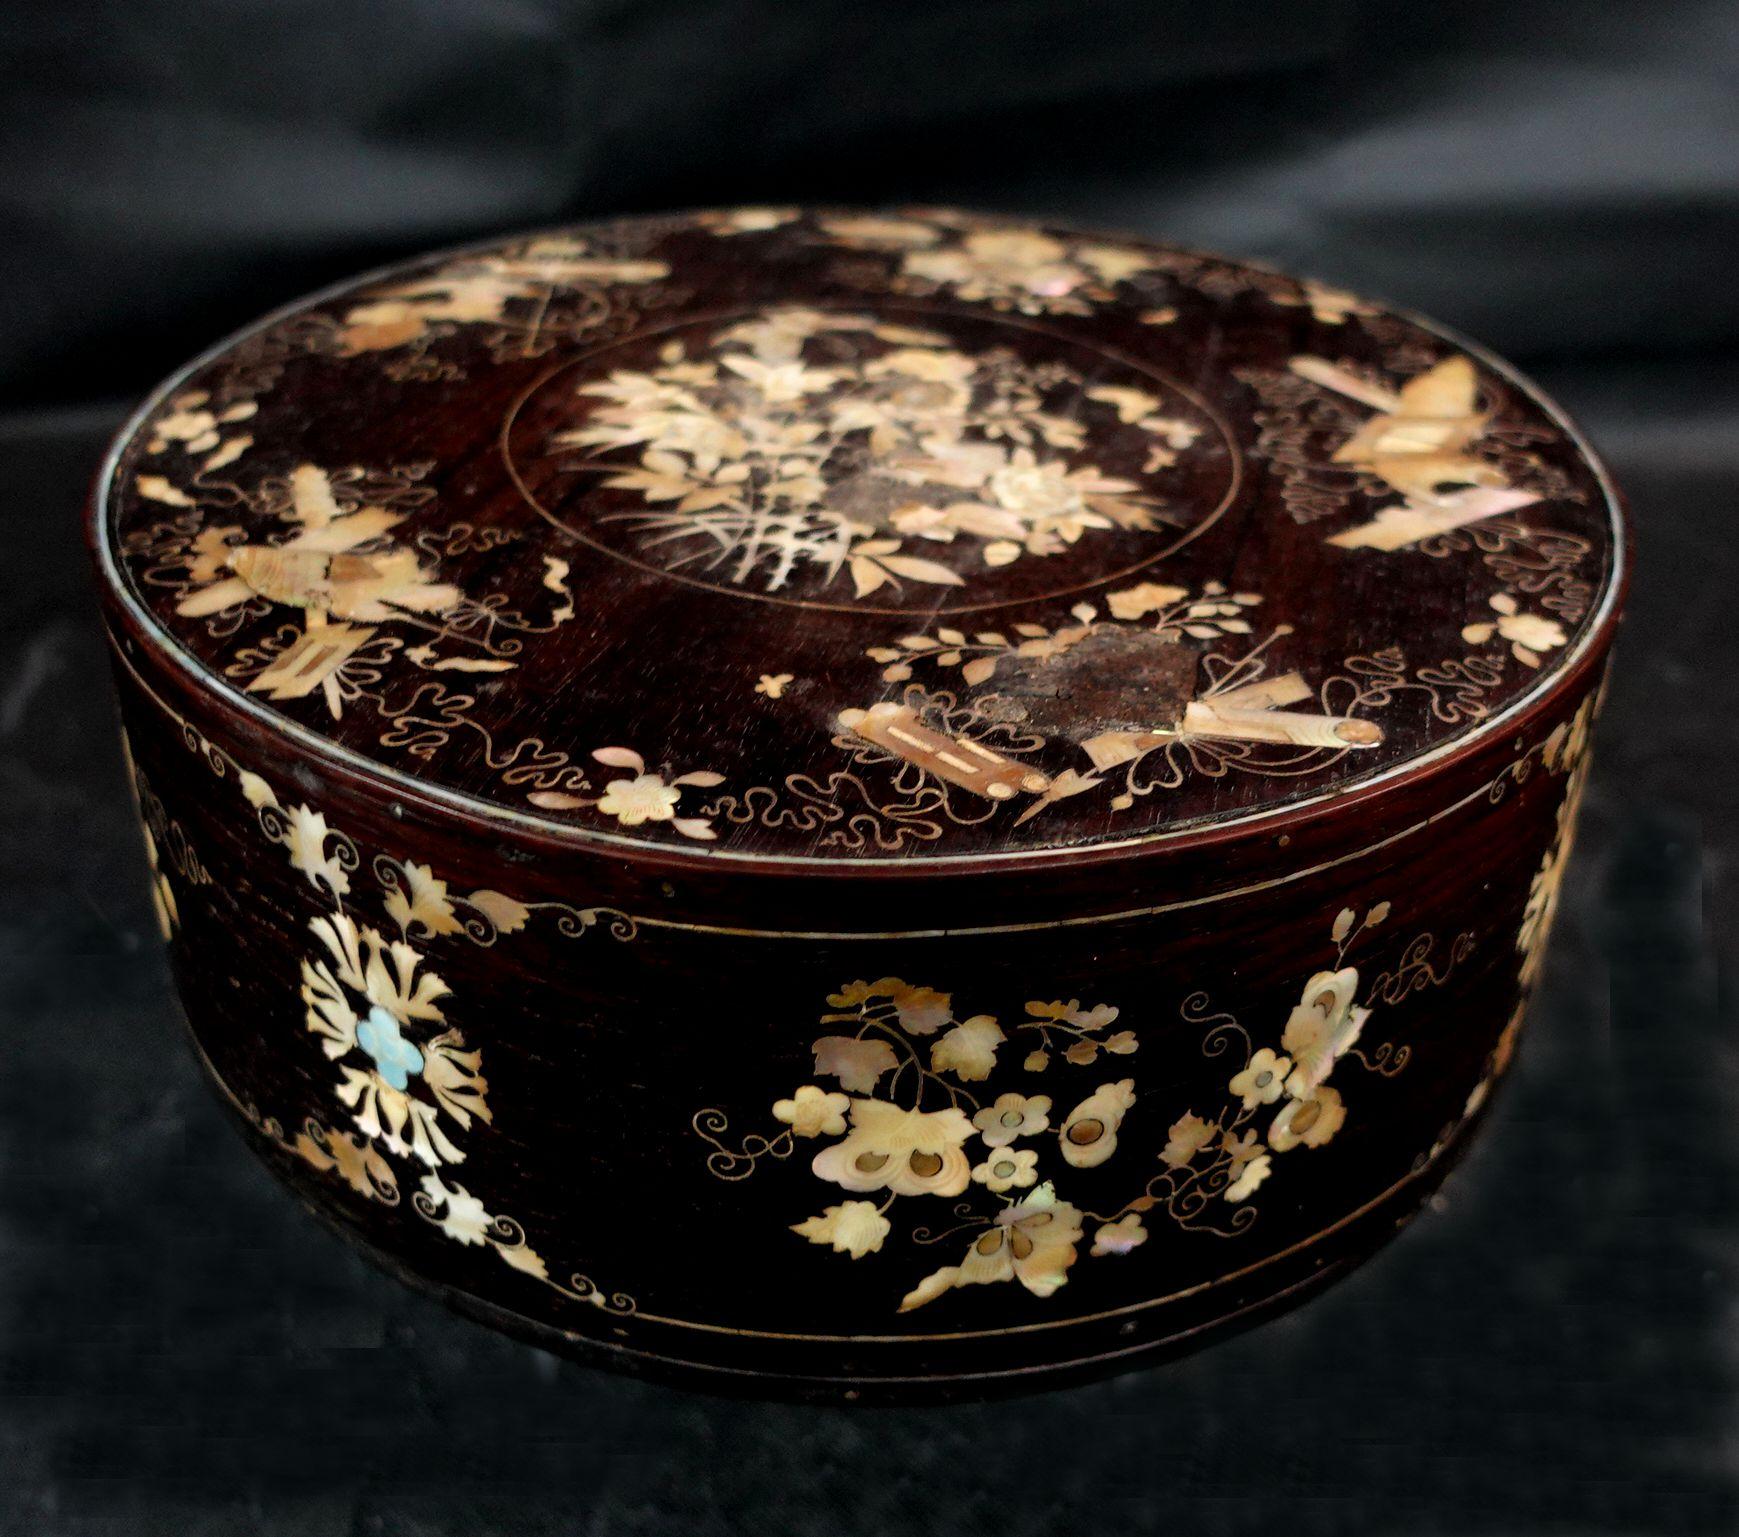 Japan, Edo to Meiji period, a circular with an inner brass tray lacquer box and cover, decorated with mother-of-pearl-inlaid a lot of intricated carving everywhere on the box, inlaid with flowers, bamboo, trees, leaves, and more different patterns,